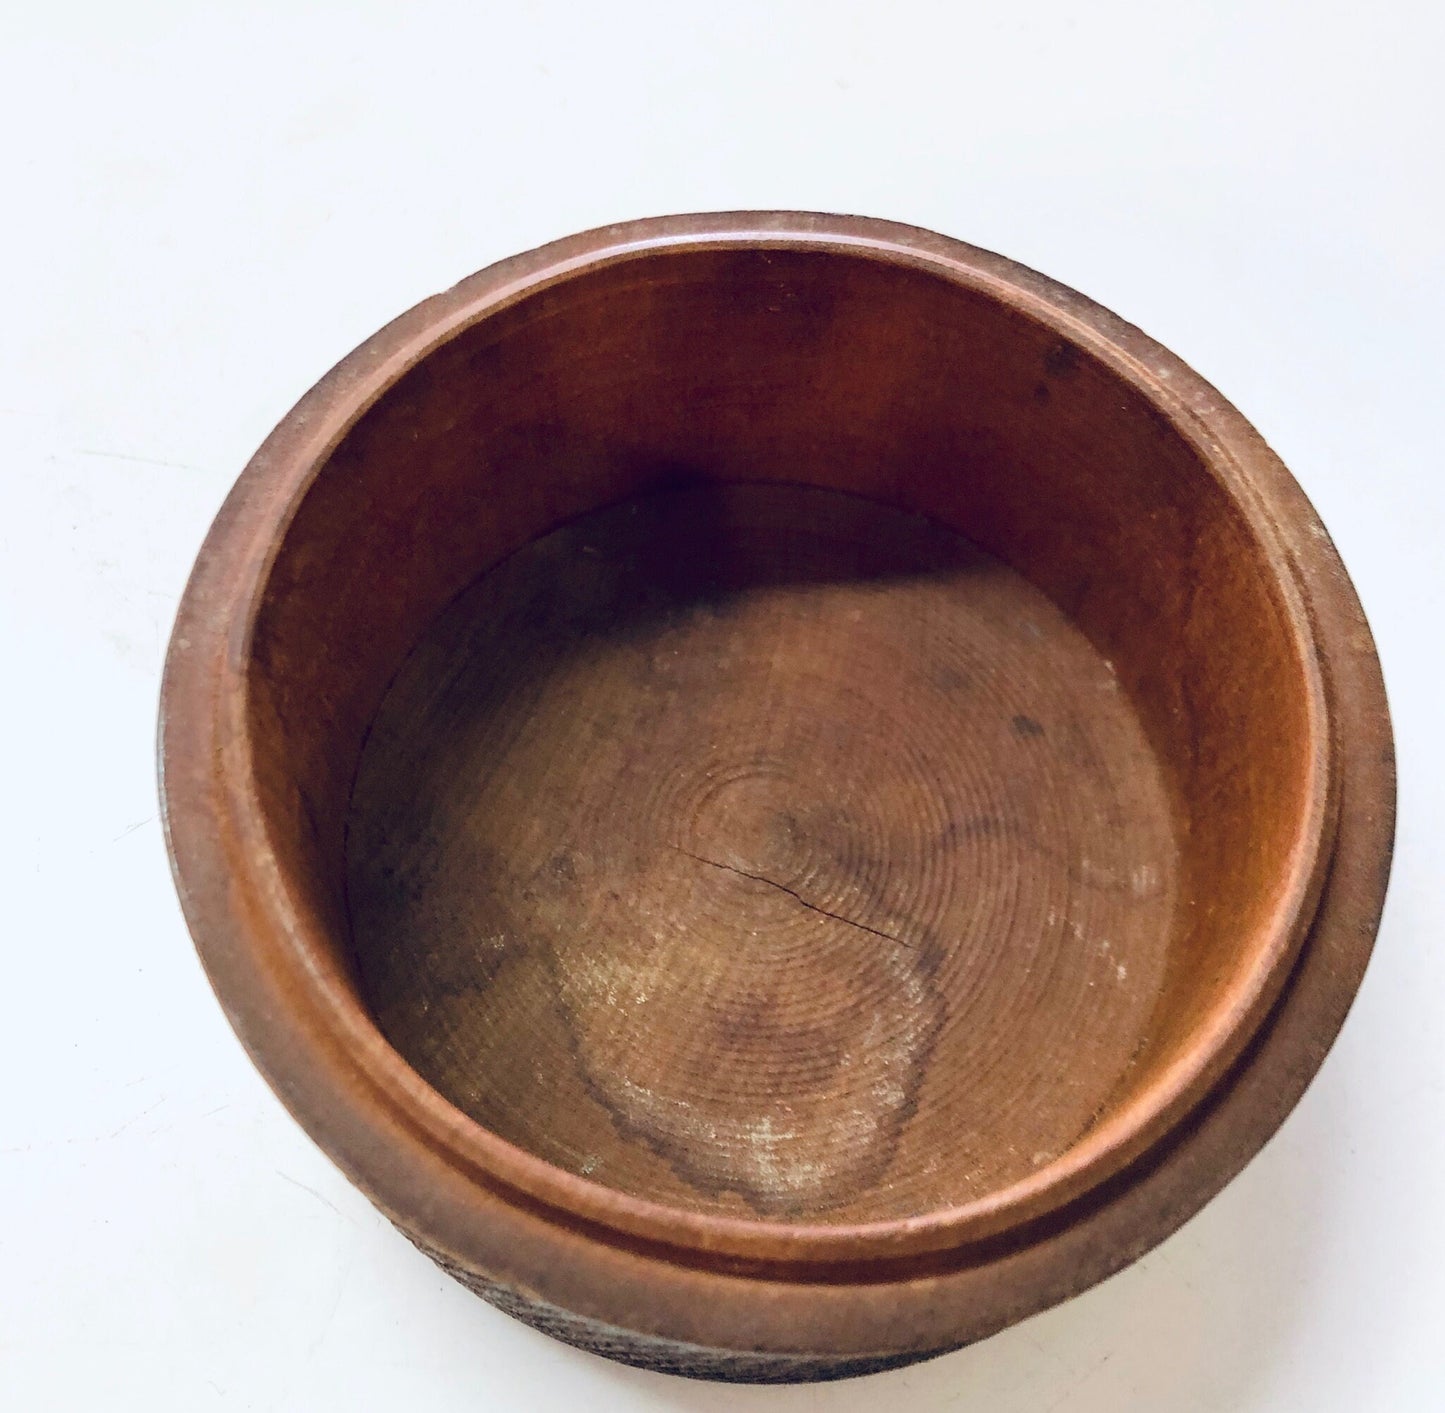 Vintage carved wooden trinket box with round shape and deep brown finish, suitable for storing jewelry or small items and adding unique decor to the home.